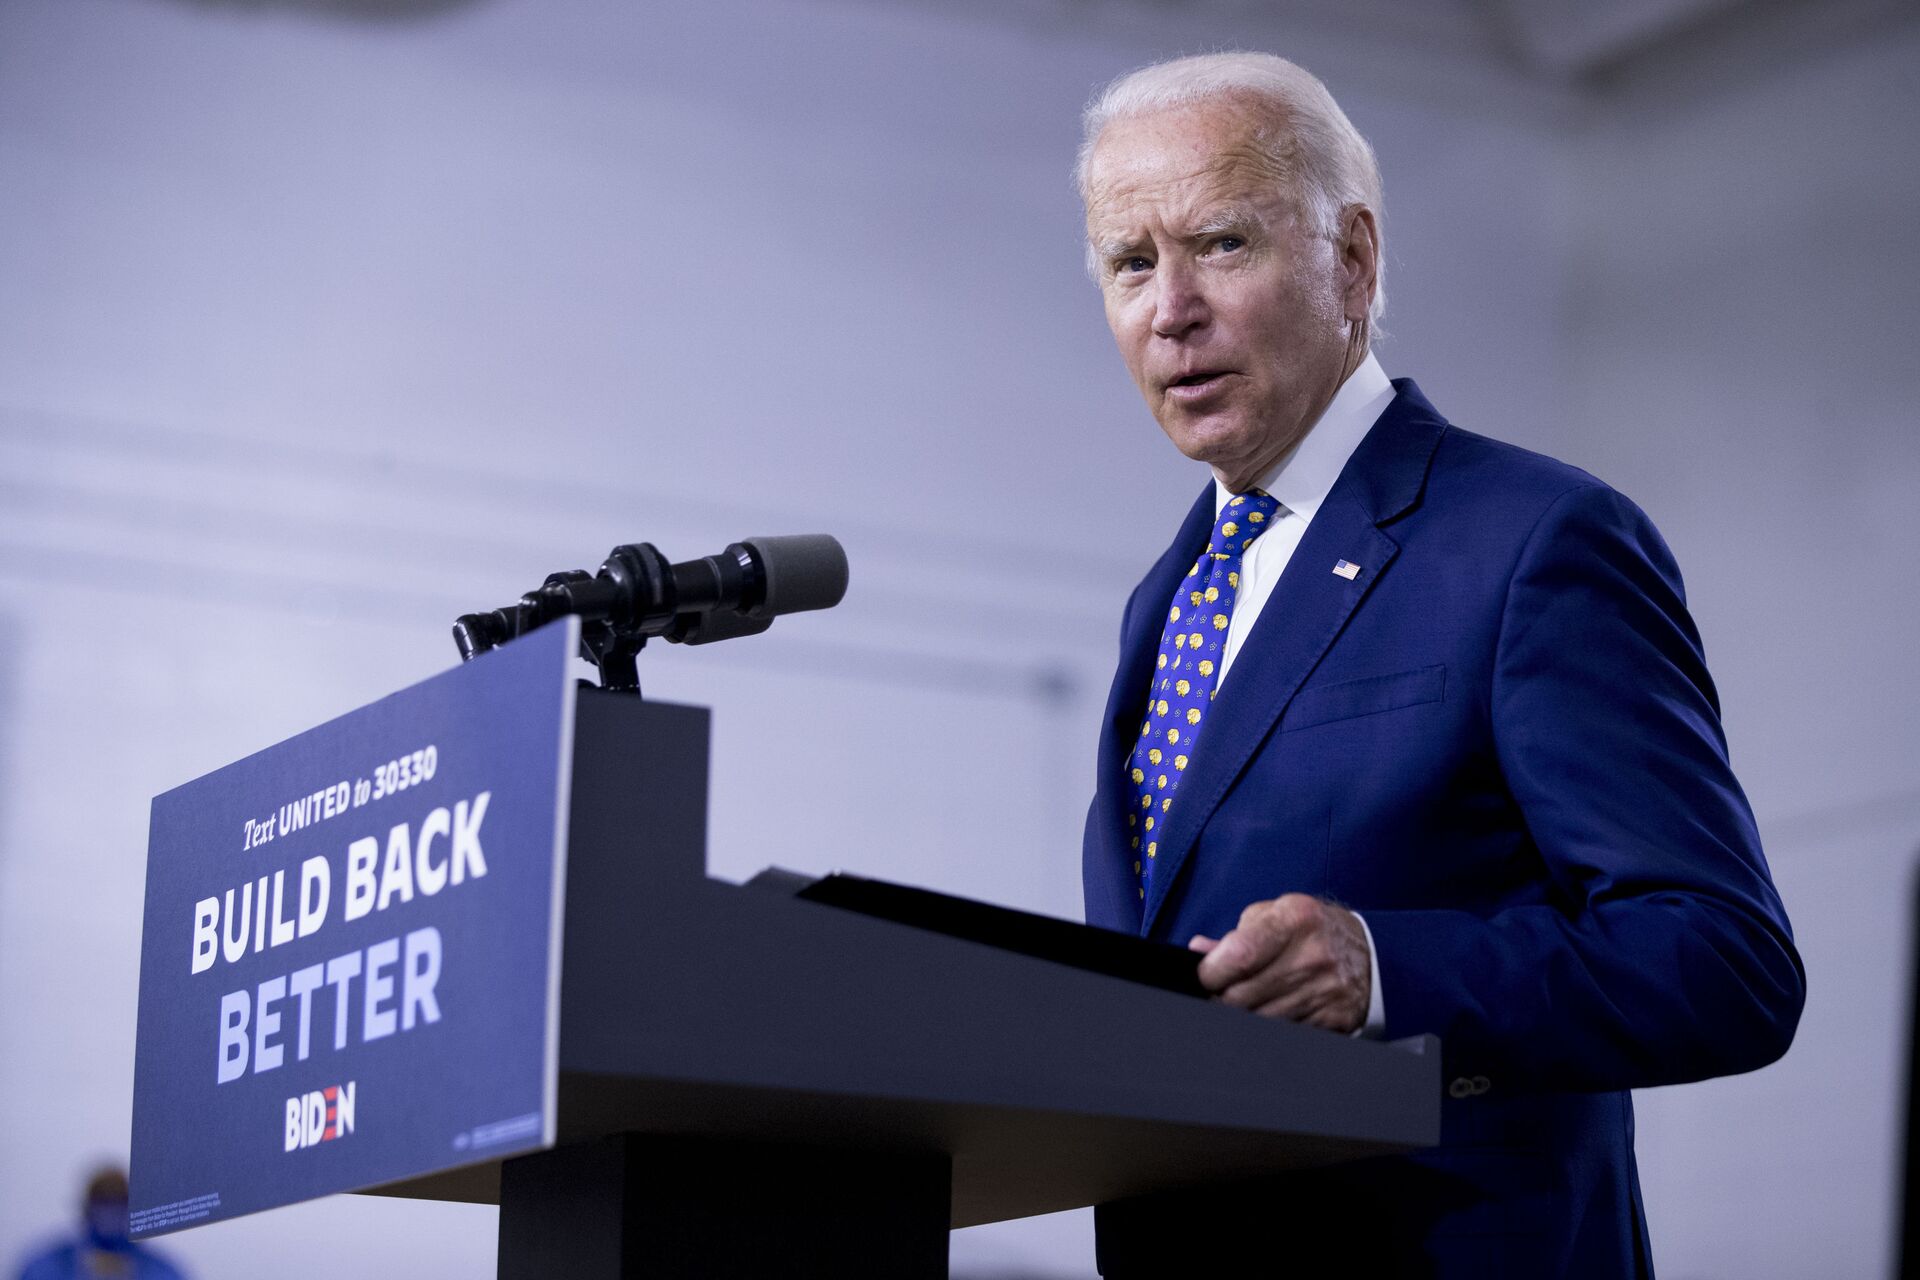 In this July 28, 2020, file photo, Democratic presidential candidate former Vice President Joe Biden speaks at a campaign event at the William Hicks Anderson Community Center in Wilmington, Del. - Sputnik International, 1920, 07.10.2021